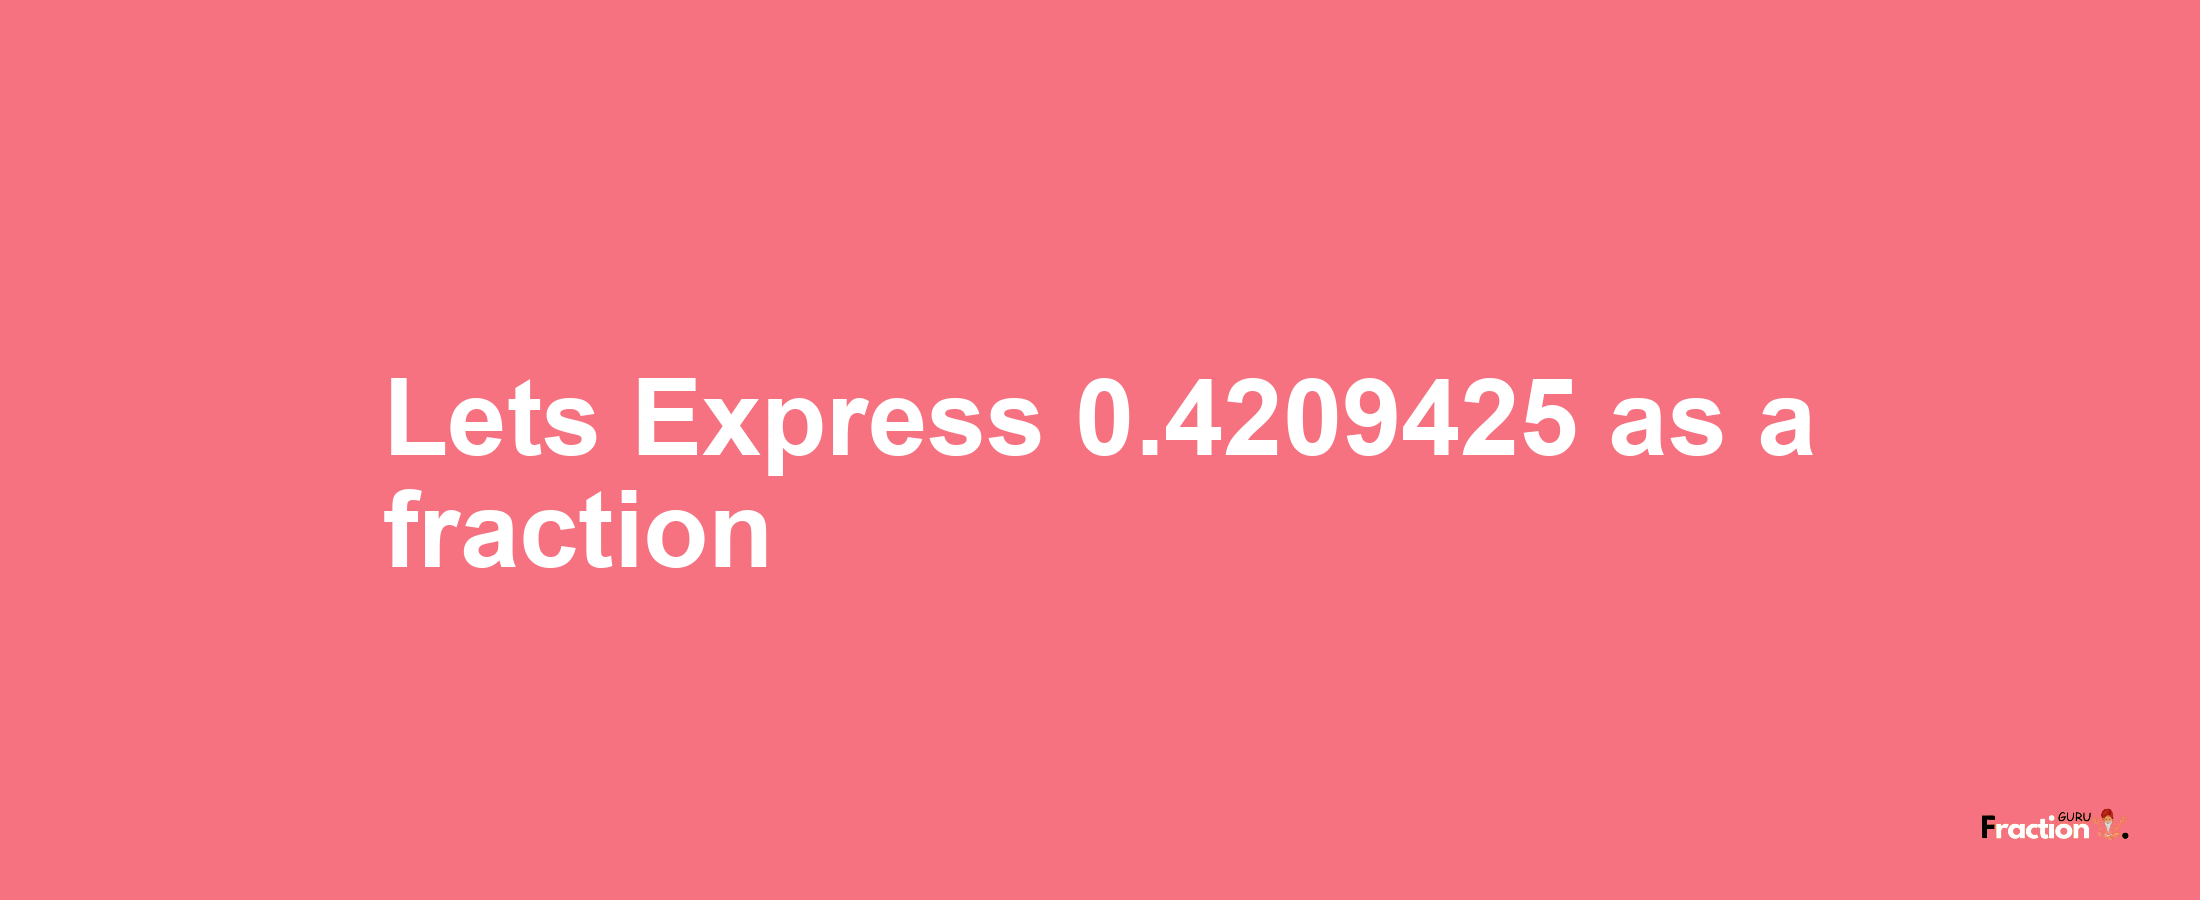 Lets Express 0.4209425 as afraction